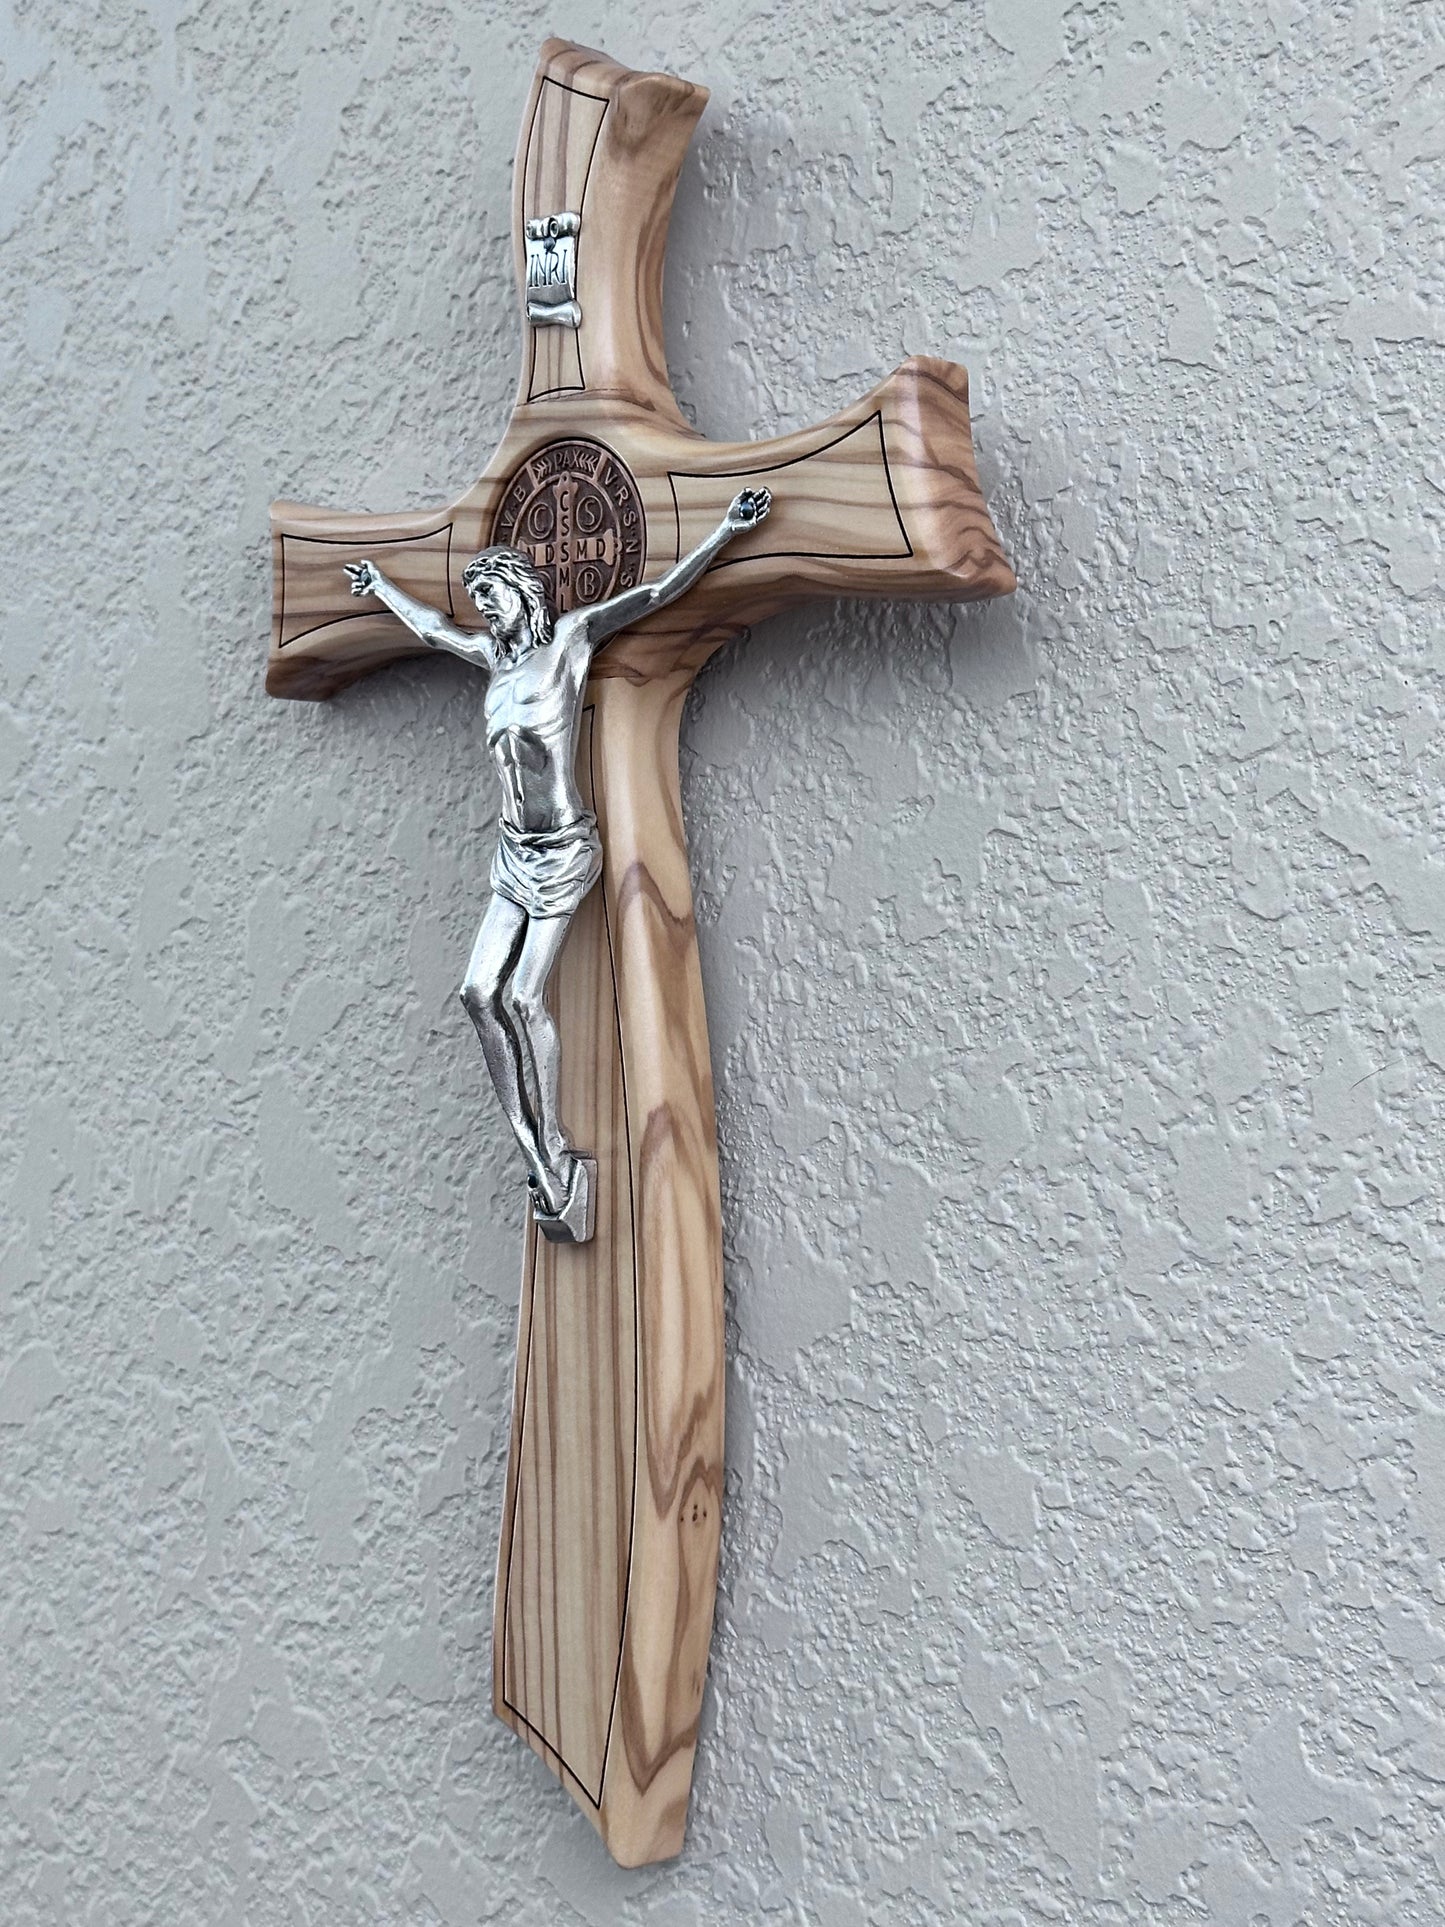 Crucifix of Saint Benedict made of olive wood and metal